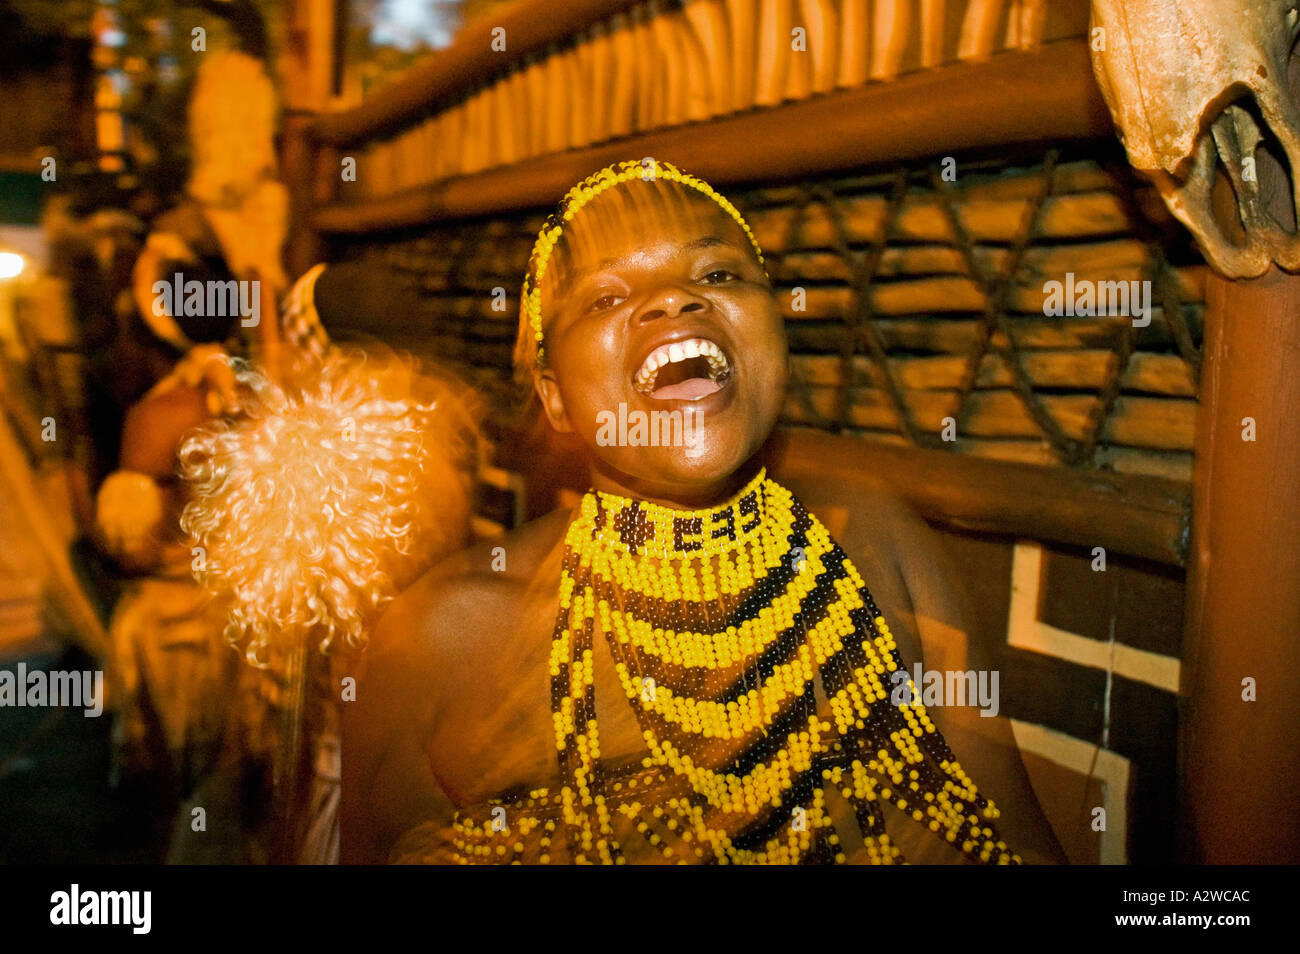 Zulu woman dancing in costume of Zulu maiden Entire outfit made of beads Worn during dancing ceremonies South Africa Stock Photo